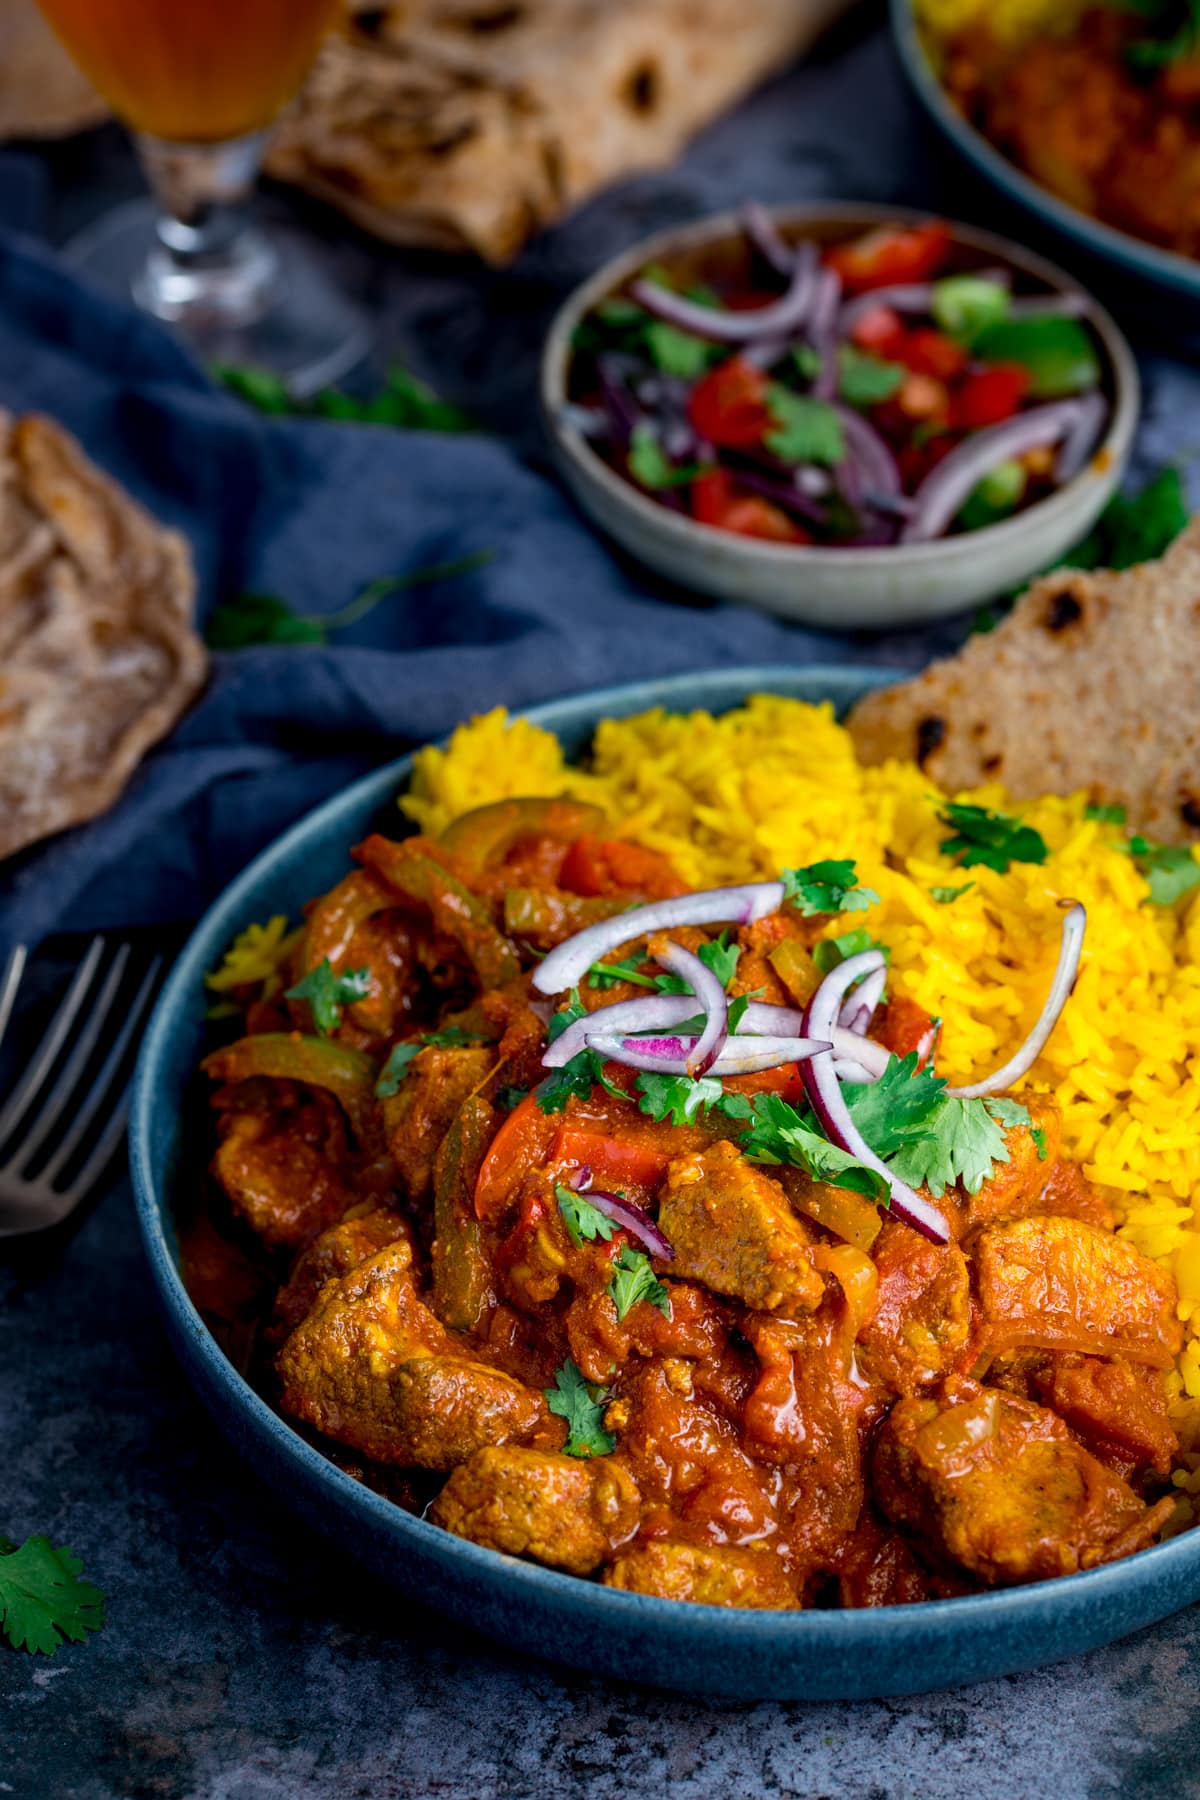 Chicken Jalfrezi with pilau rice in a blue bowl on a blue background. There is a bowl of tomato and onion salad in the background, along with forks, pieces of chapati and a further bowl of food just in shot.